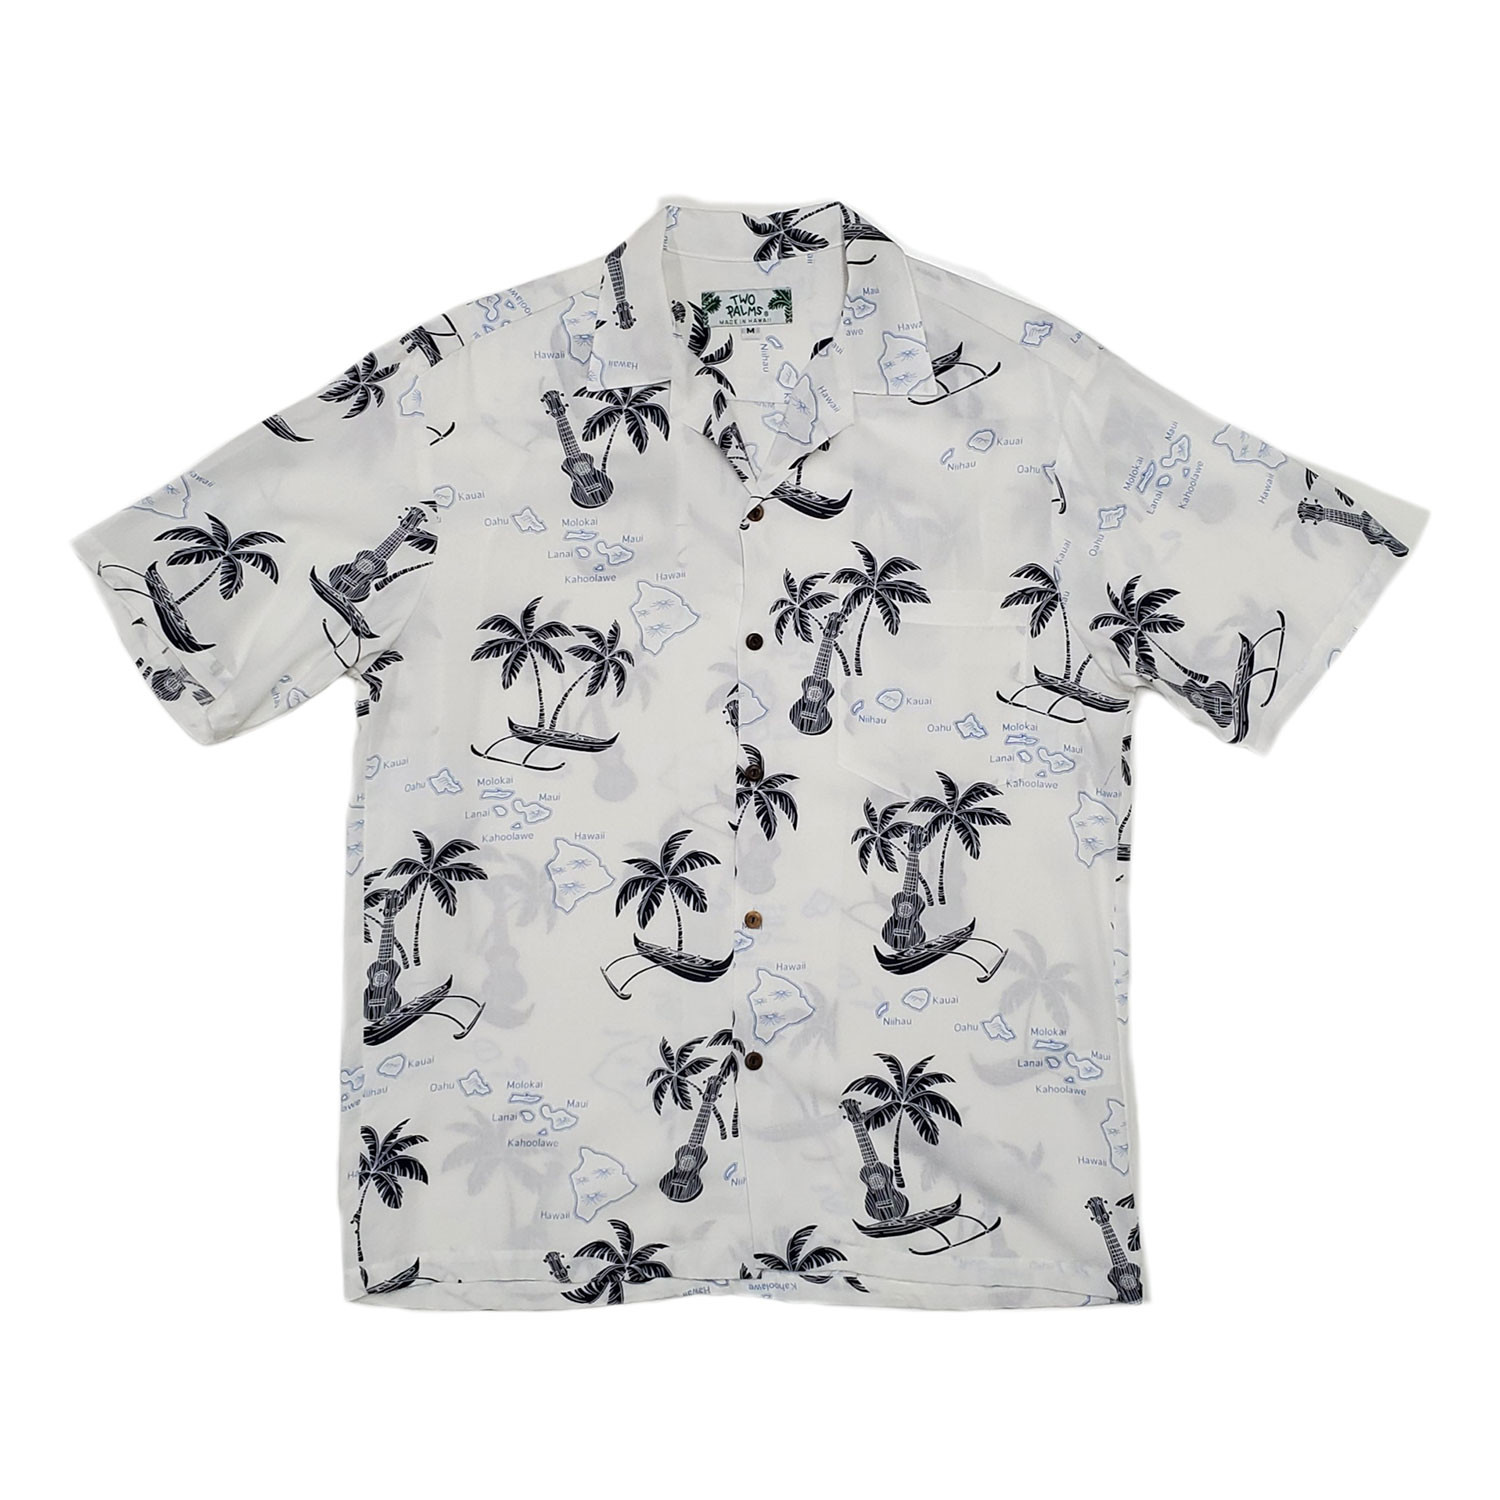 Islands Shirt // White (Small) - Two Palms Hawaii PERMANENT STORE ...